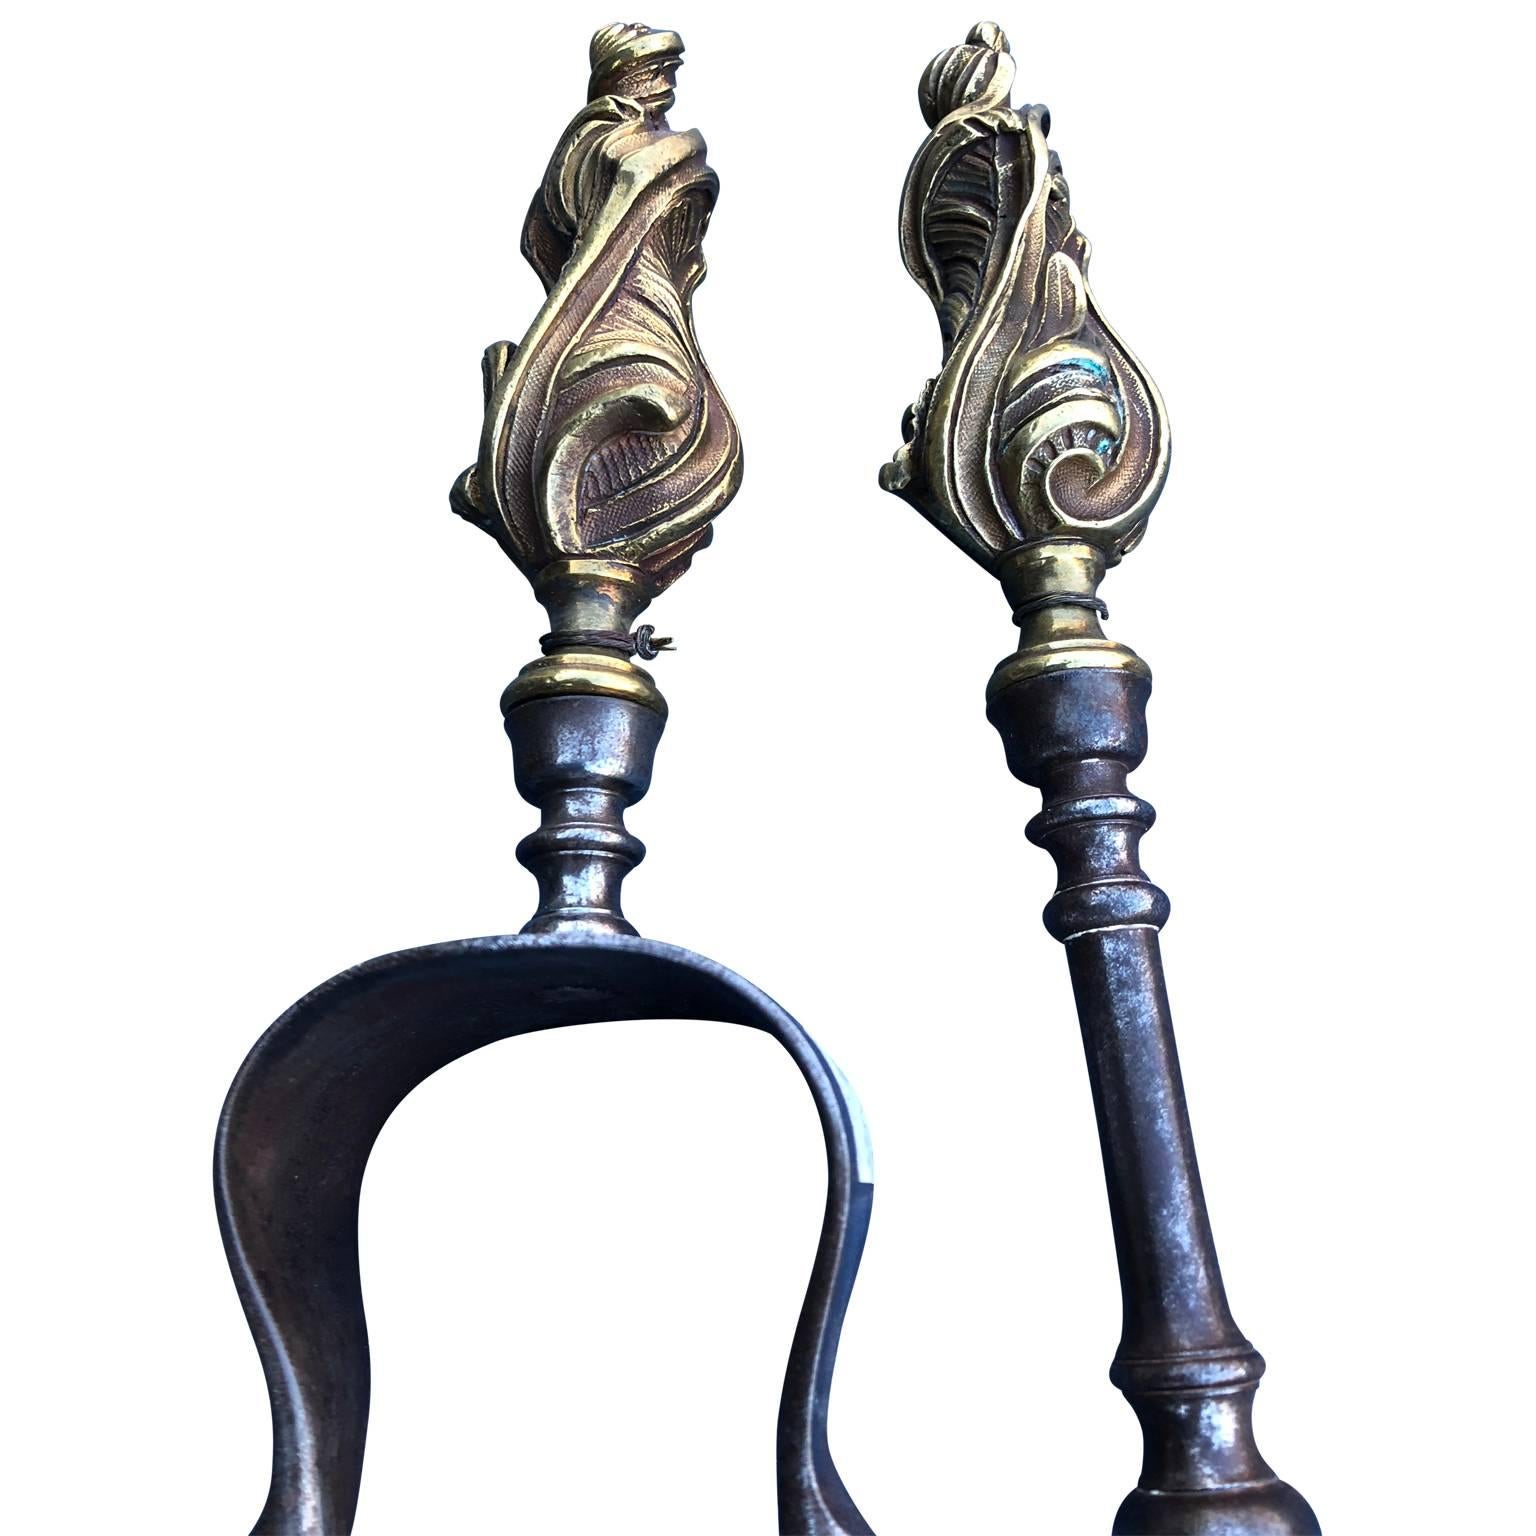 Set of 18th century fire place tools with bronze finials and iron hardware.